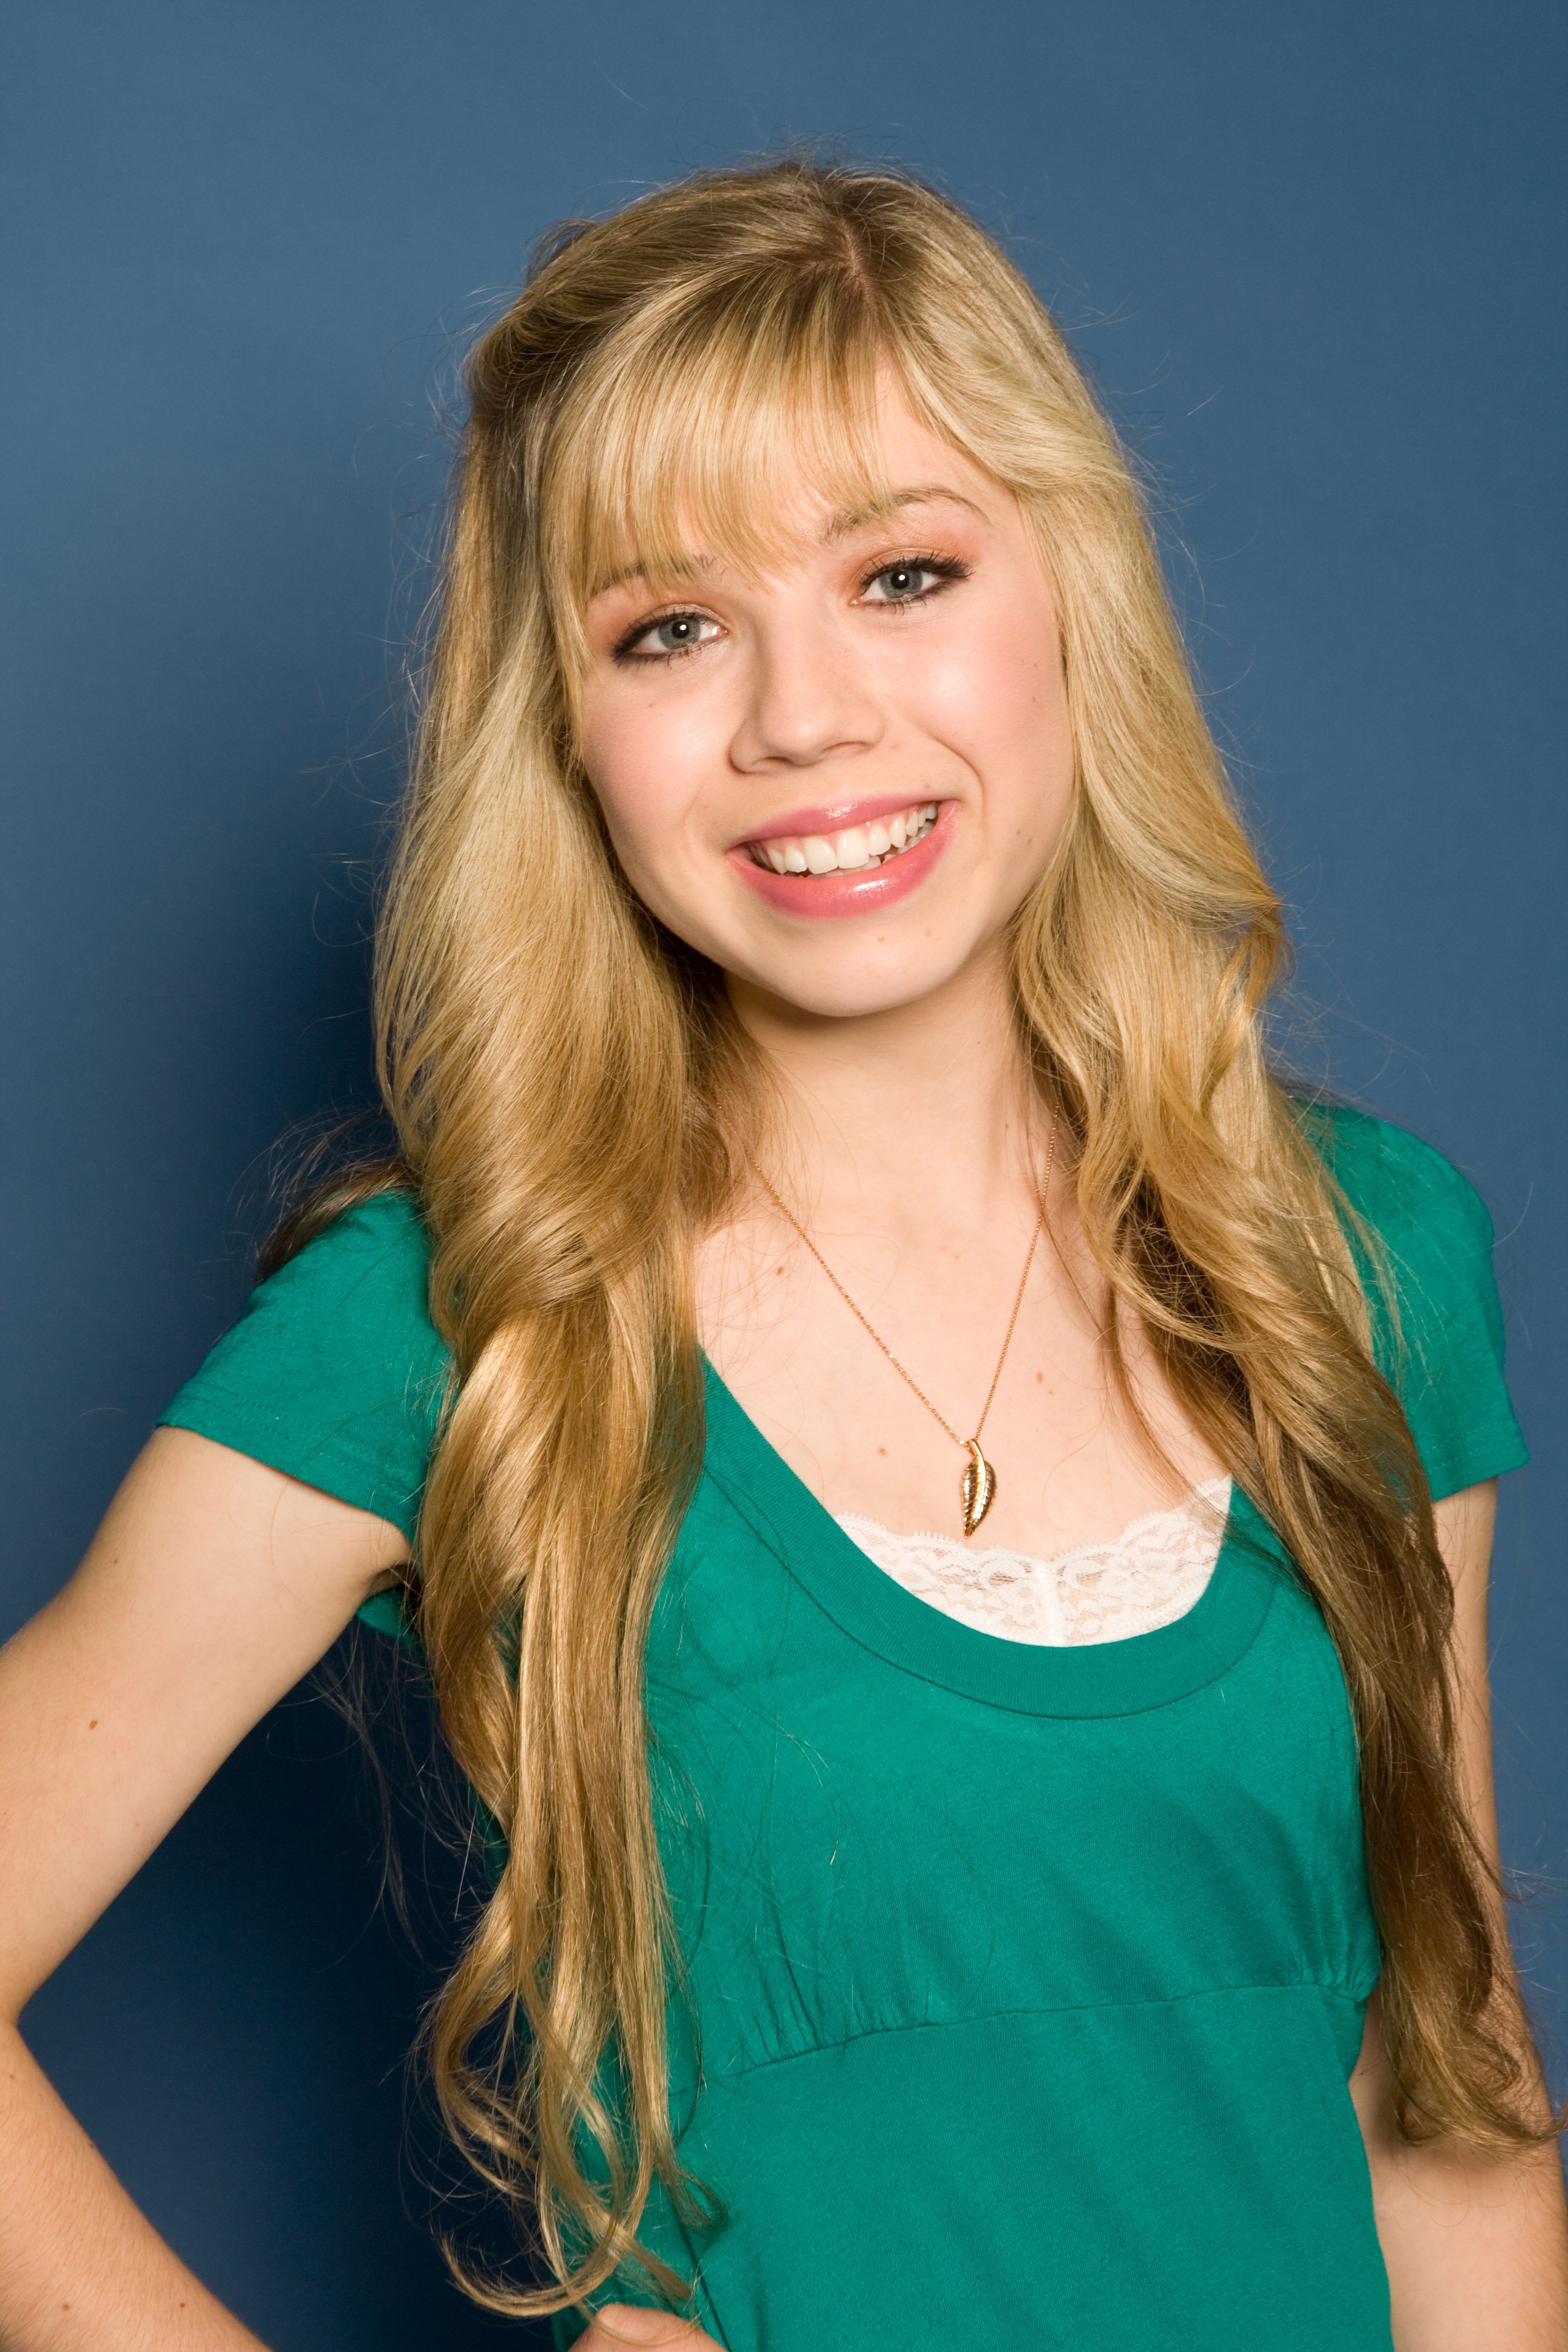 Who Was Debra McCurdy? Jennette’s McCurdy’s Mom Pushed Her into Acting